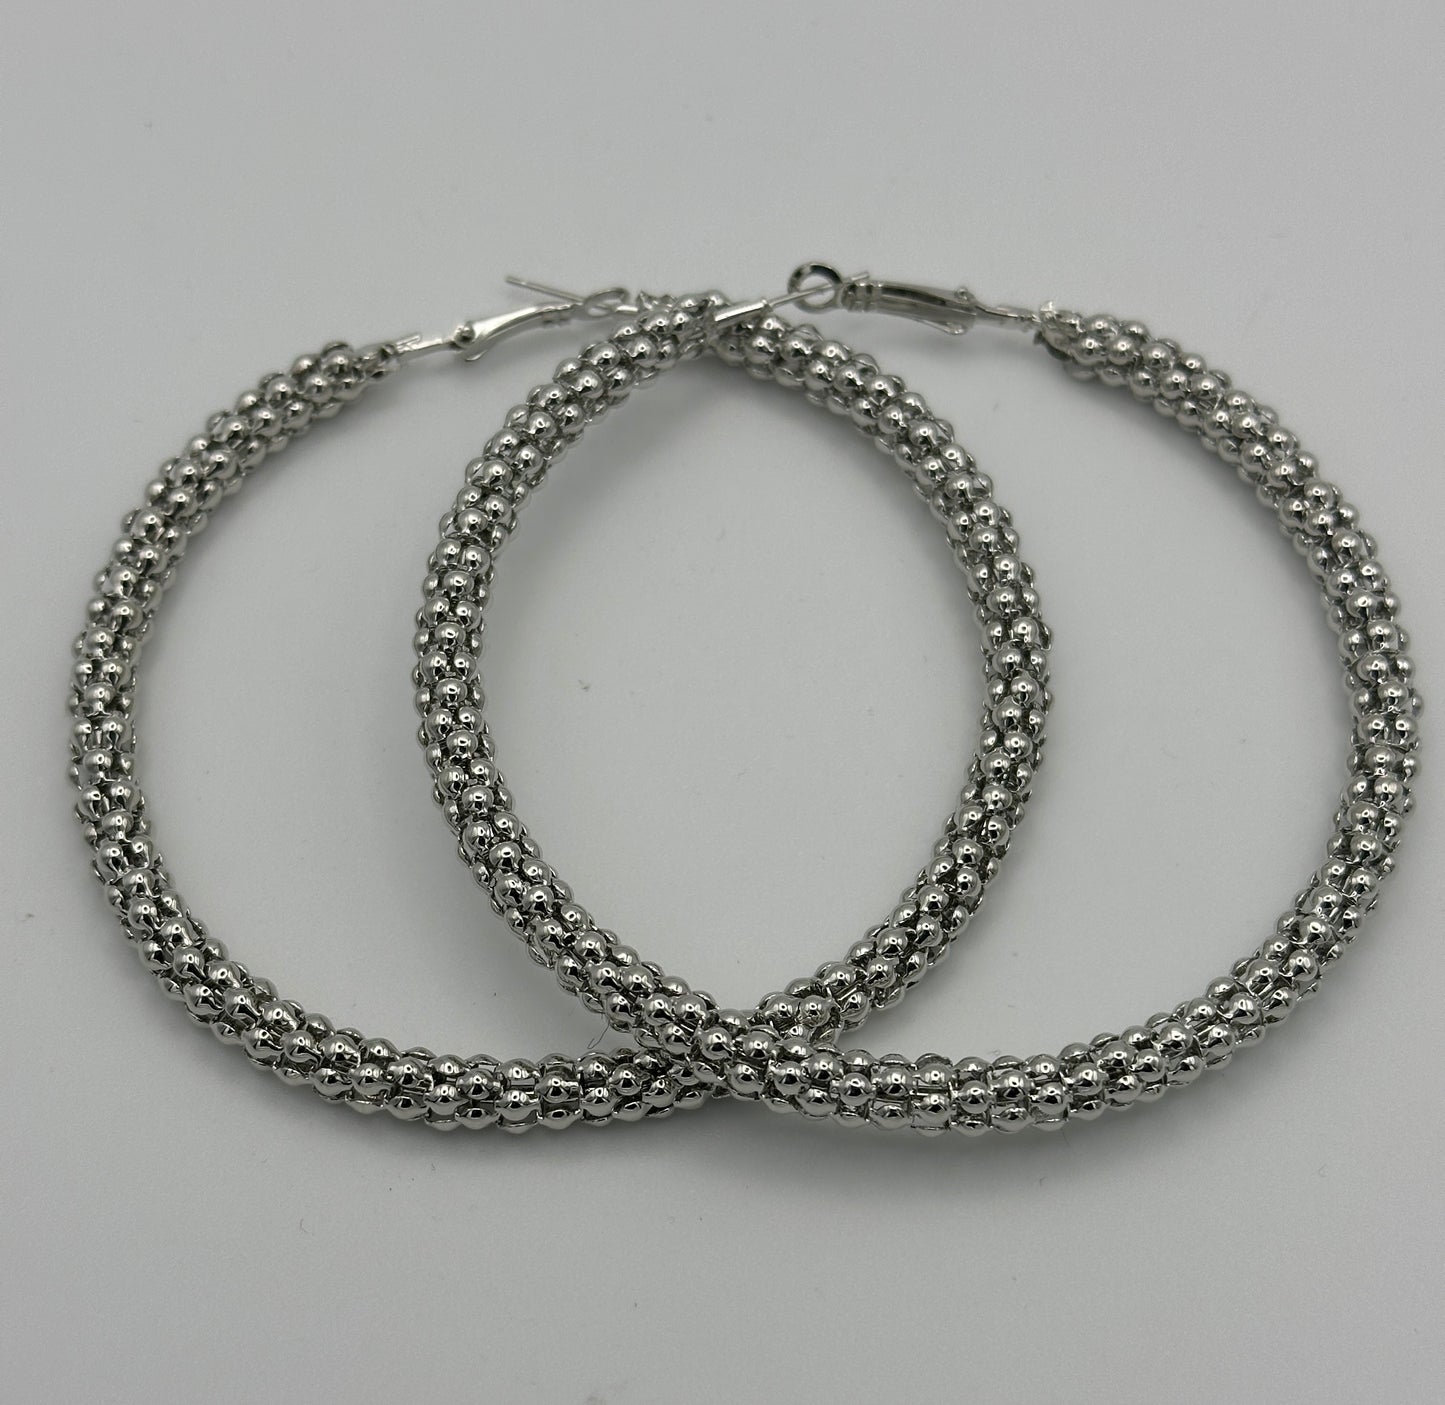 7CM Thick Chunky Statement Hoop Earrings